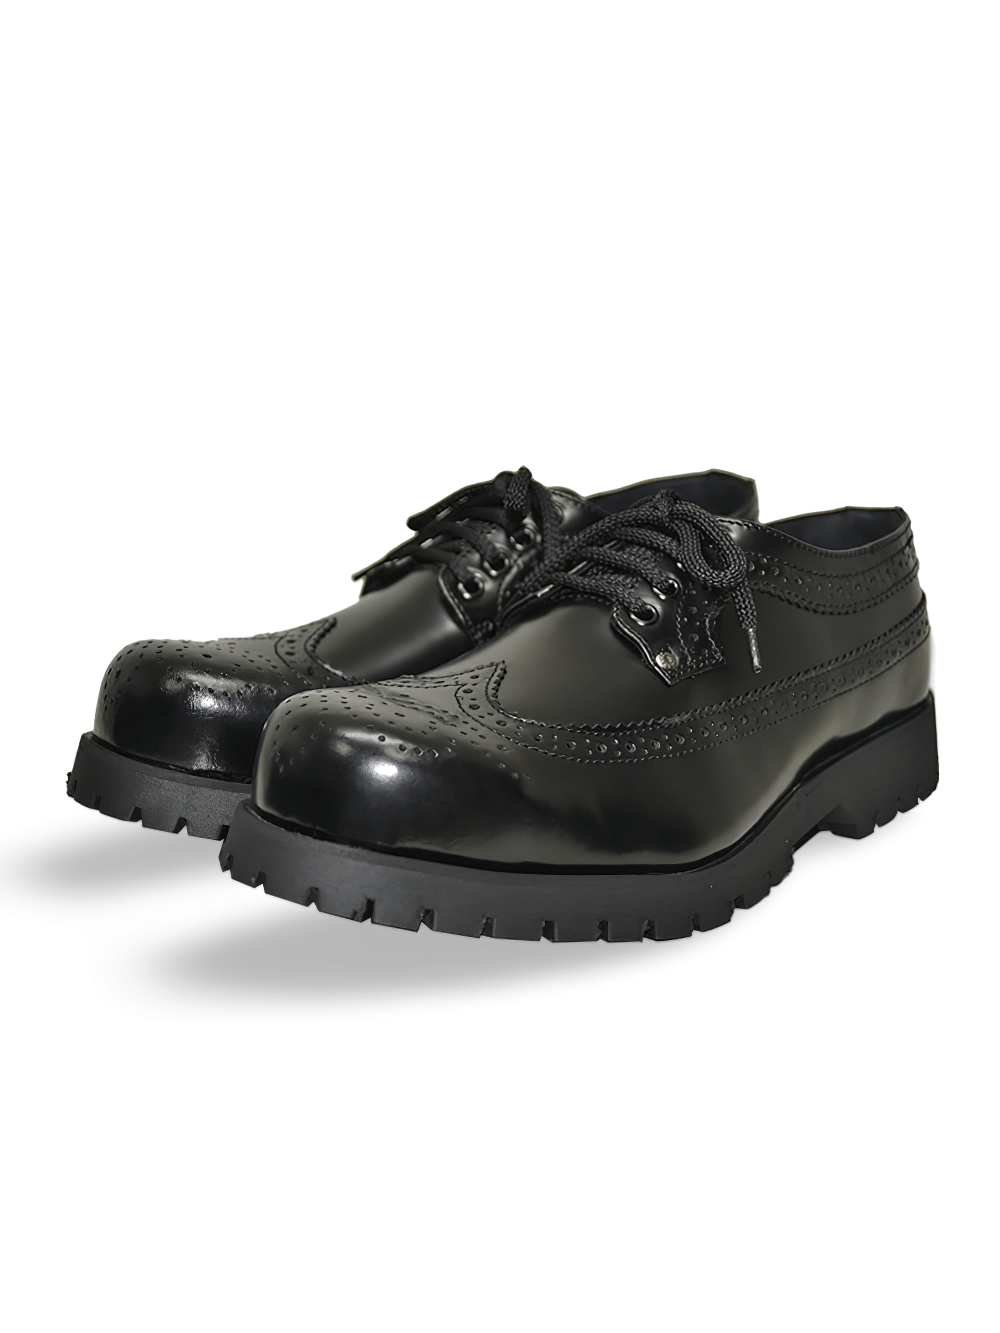 Black Box Leather Rangers Shoes with Steel Toe